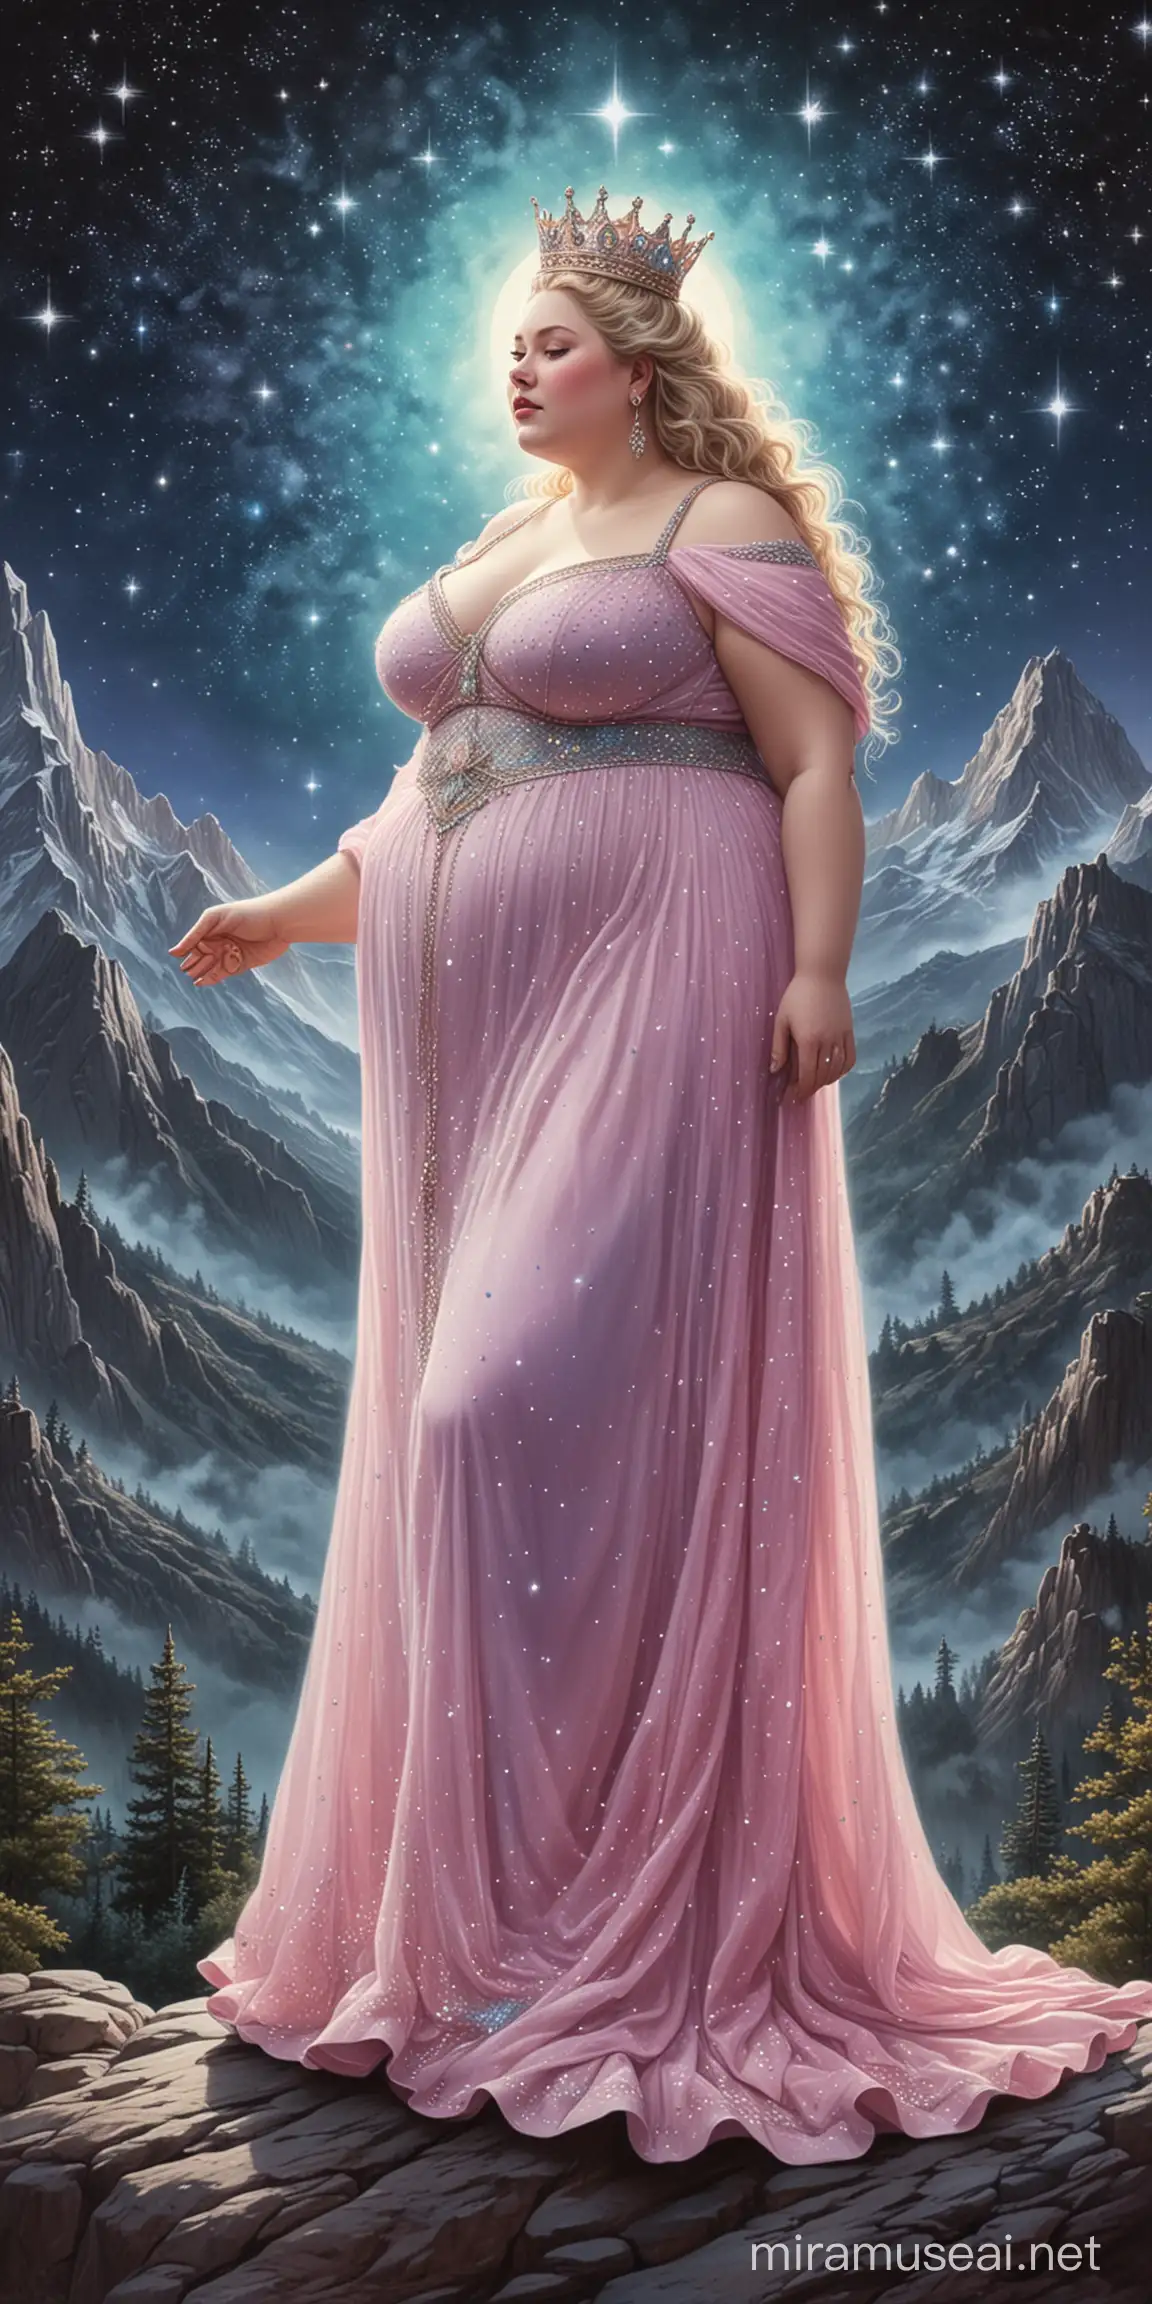 Obese Queen Surrounded by Rich Pastel Drawings and Decorative Cards Artistic Depiction with Mountainous Background and Shining Night Sky